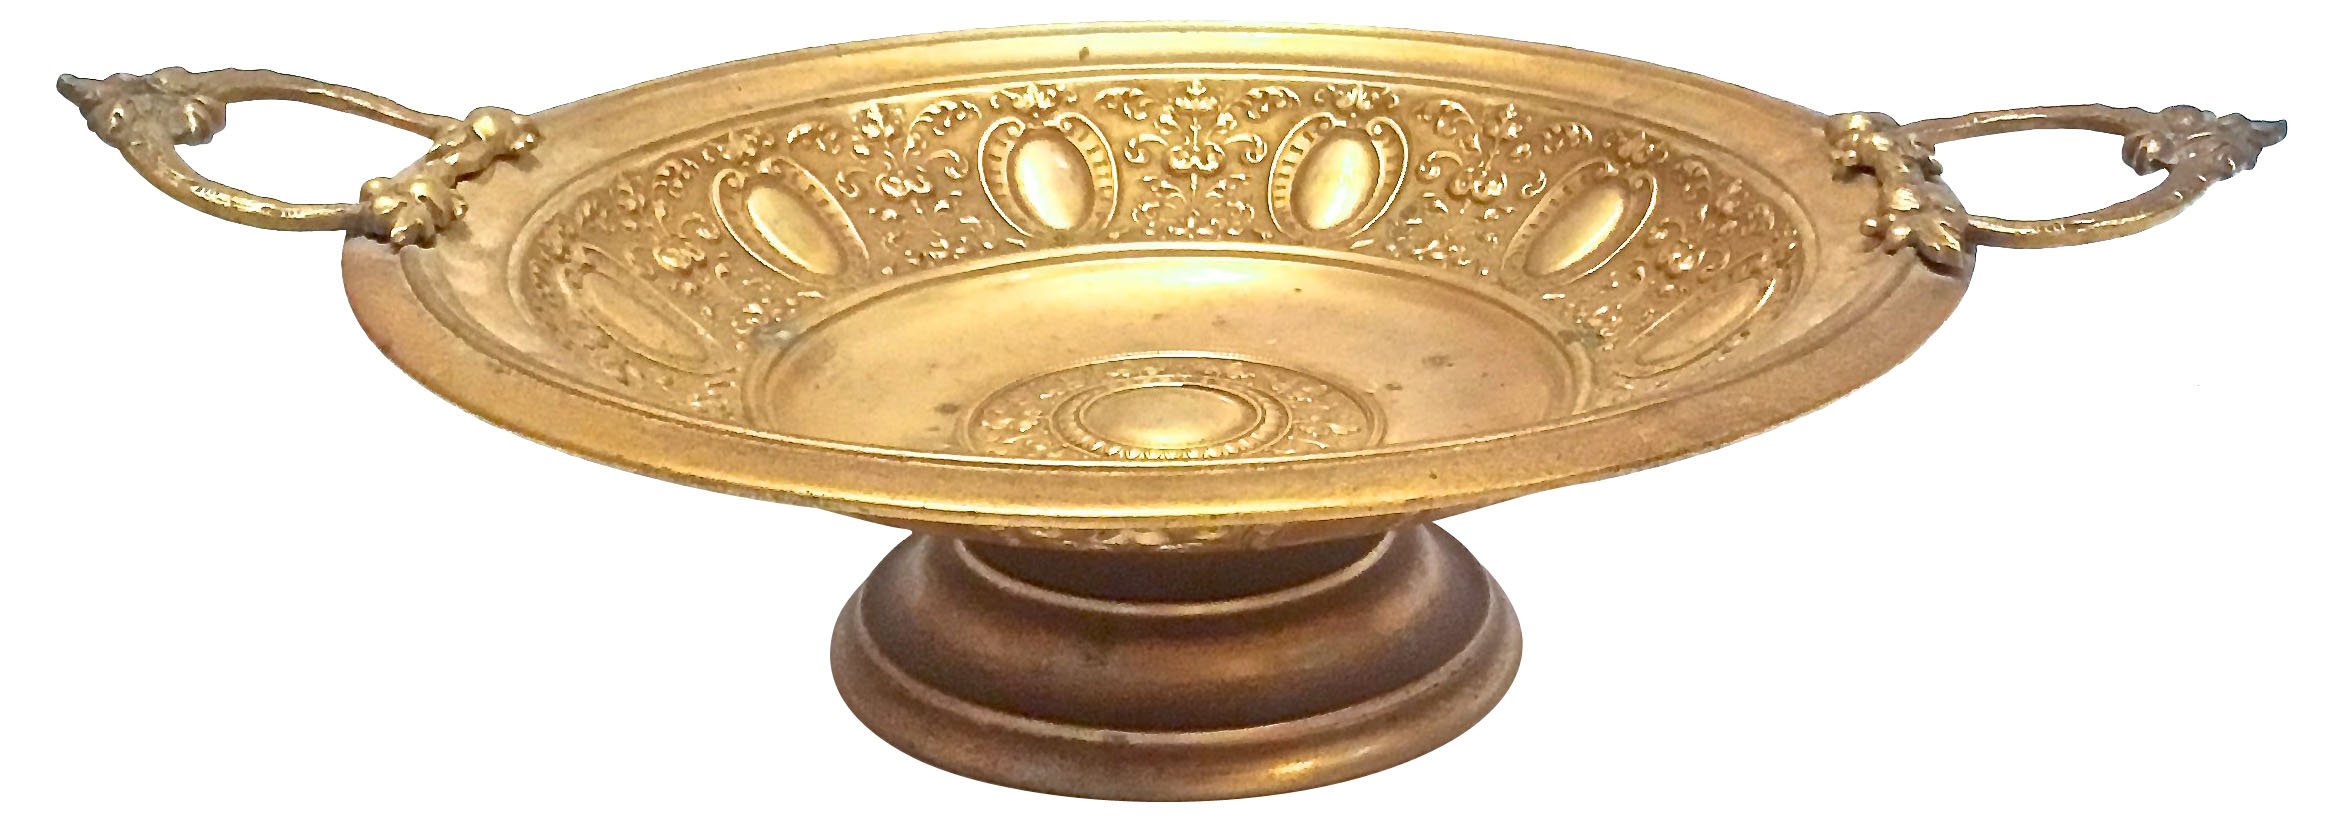 Brass Acanthus Leaf & Fruit Compote Dish~P77448497